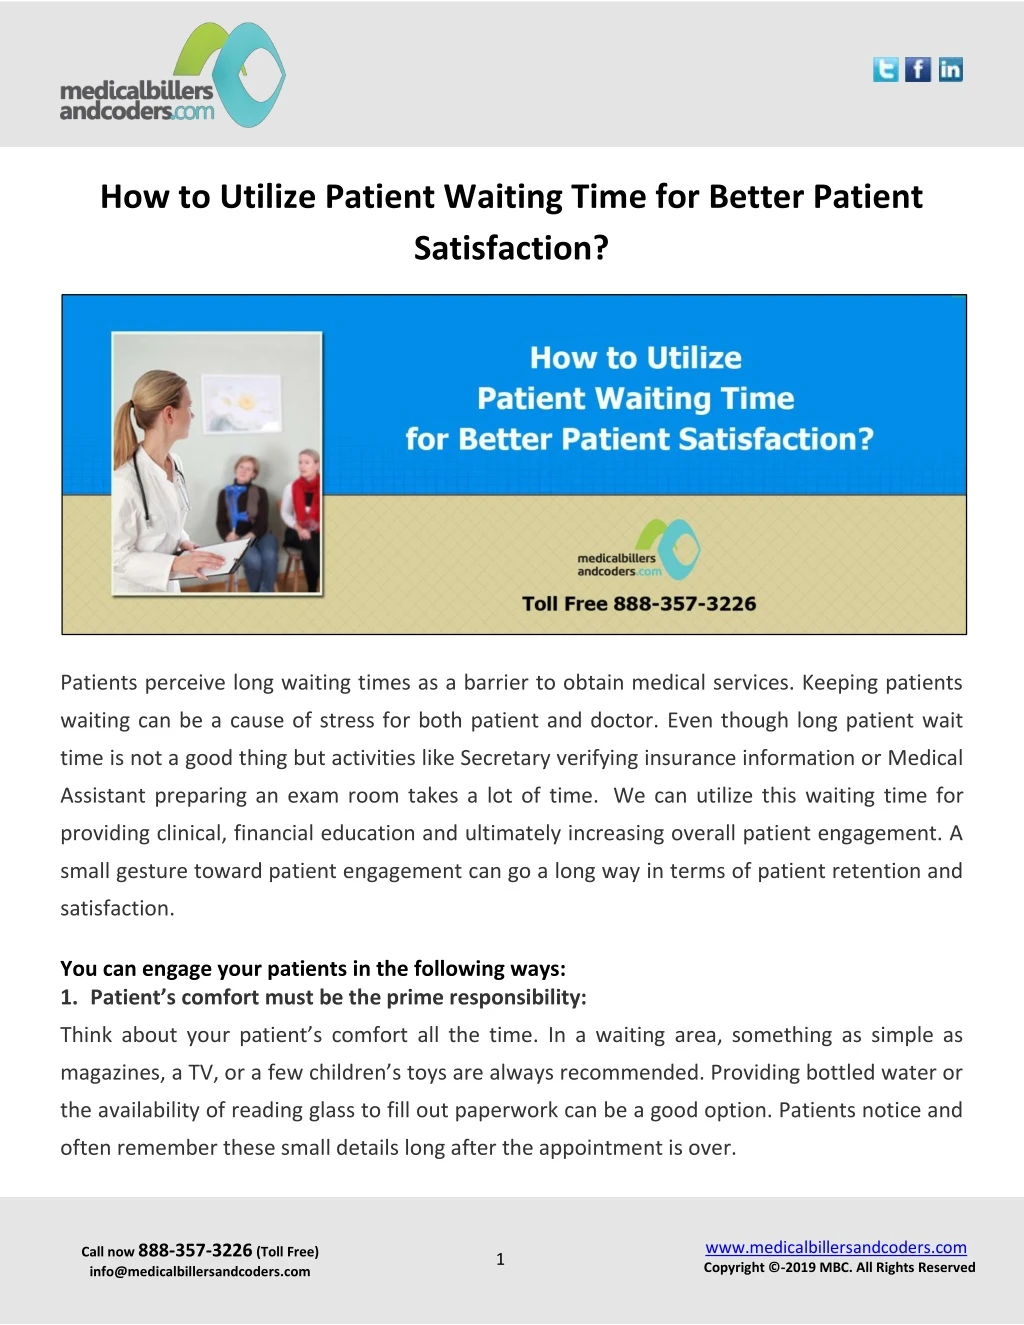 how to utilize patient waiting time for better